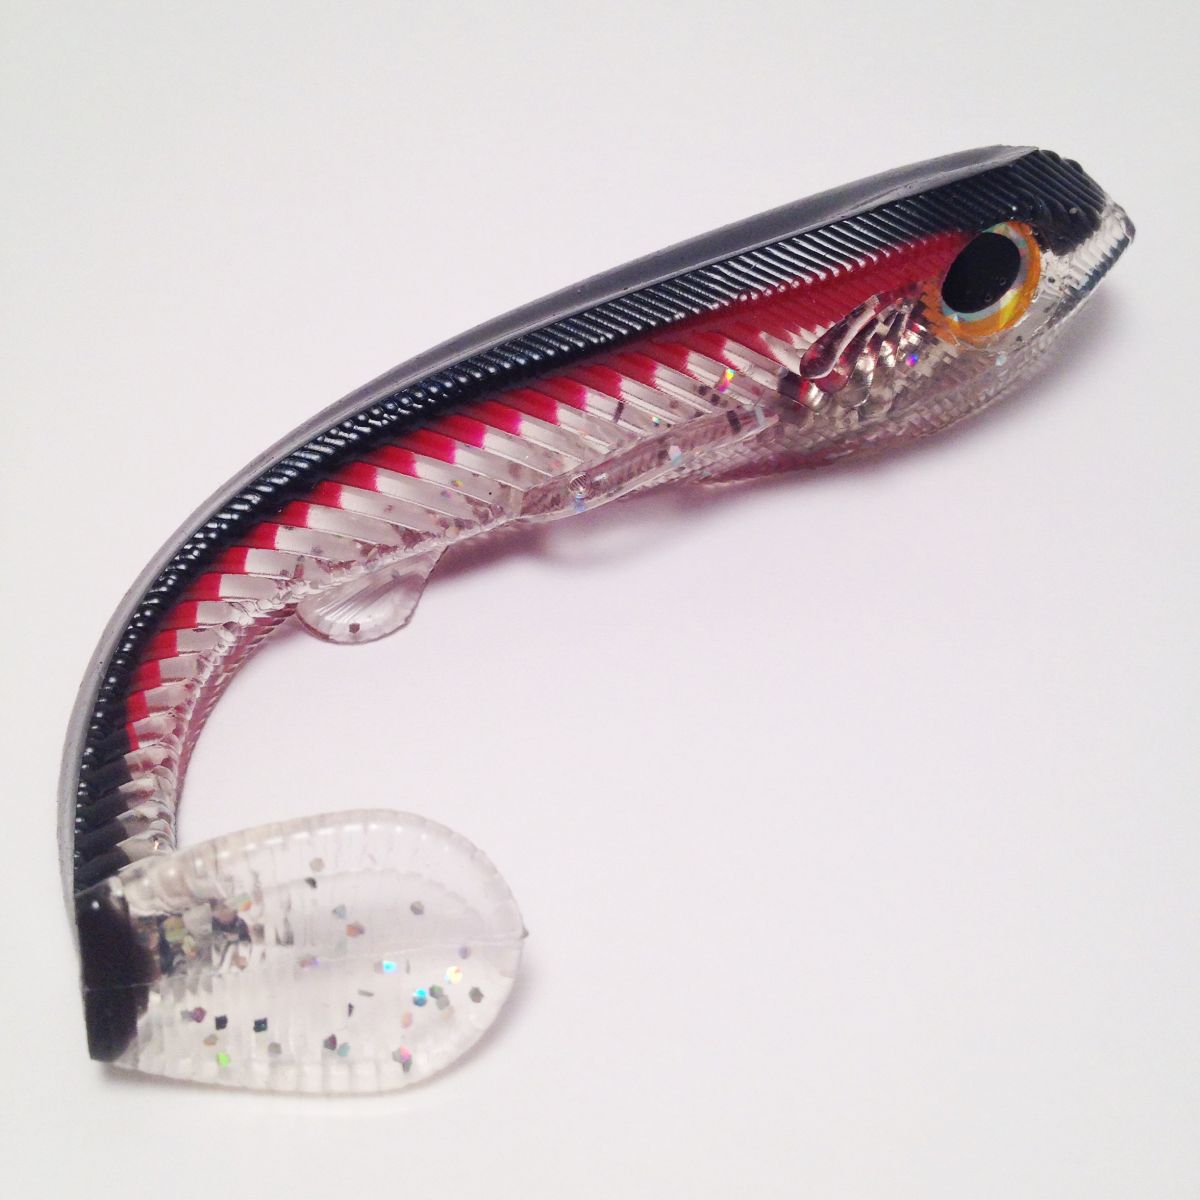 Stunned Mullet - Soft Baits -  - Tackle